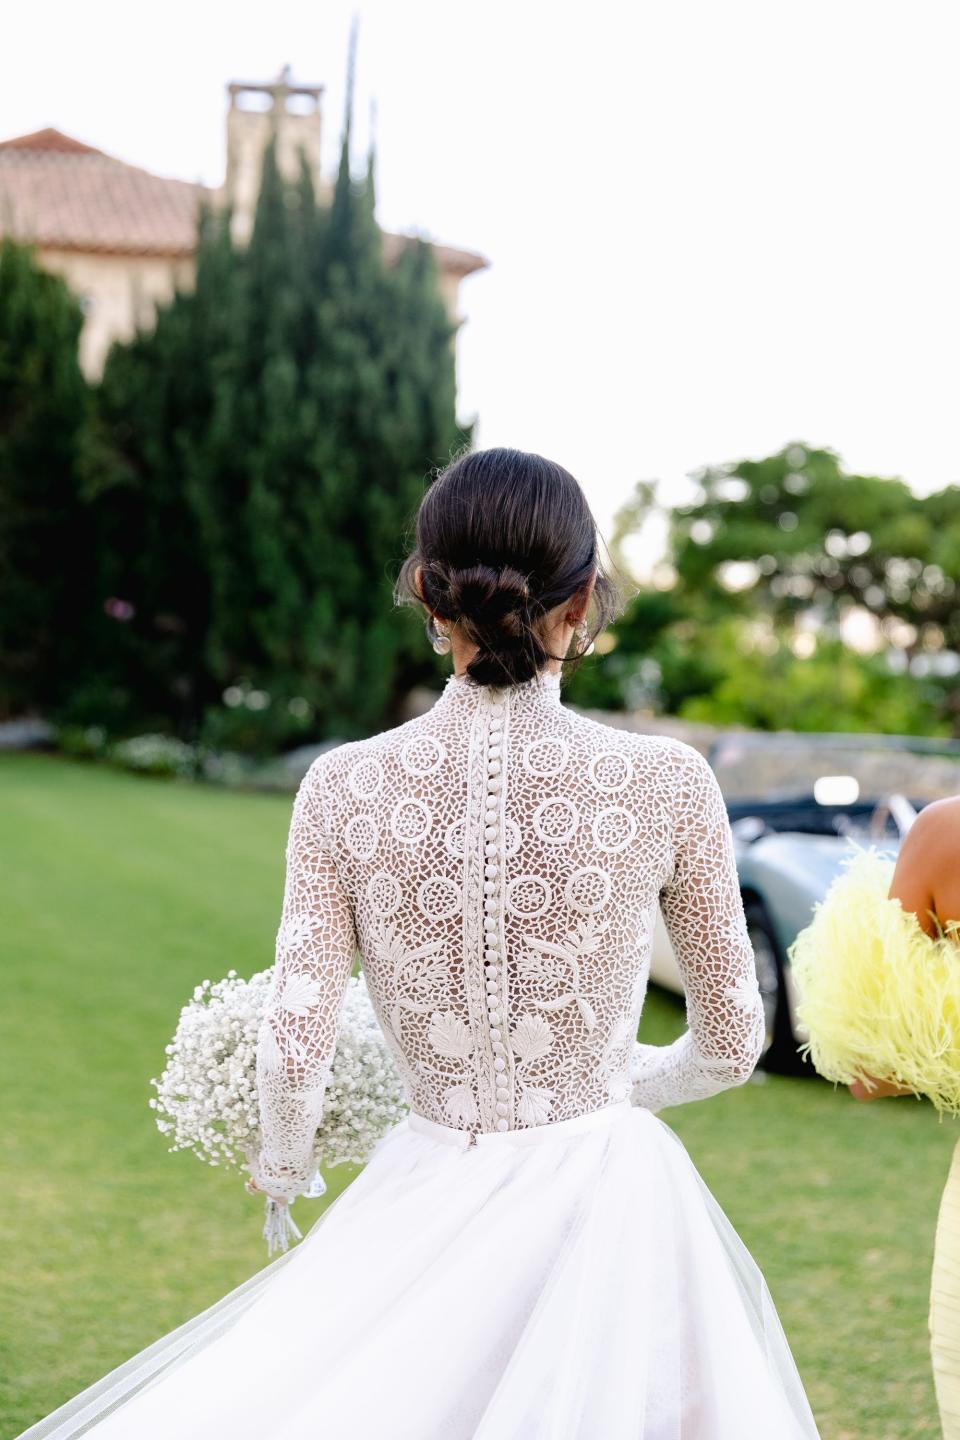 The back of a bride's dress.